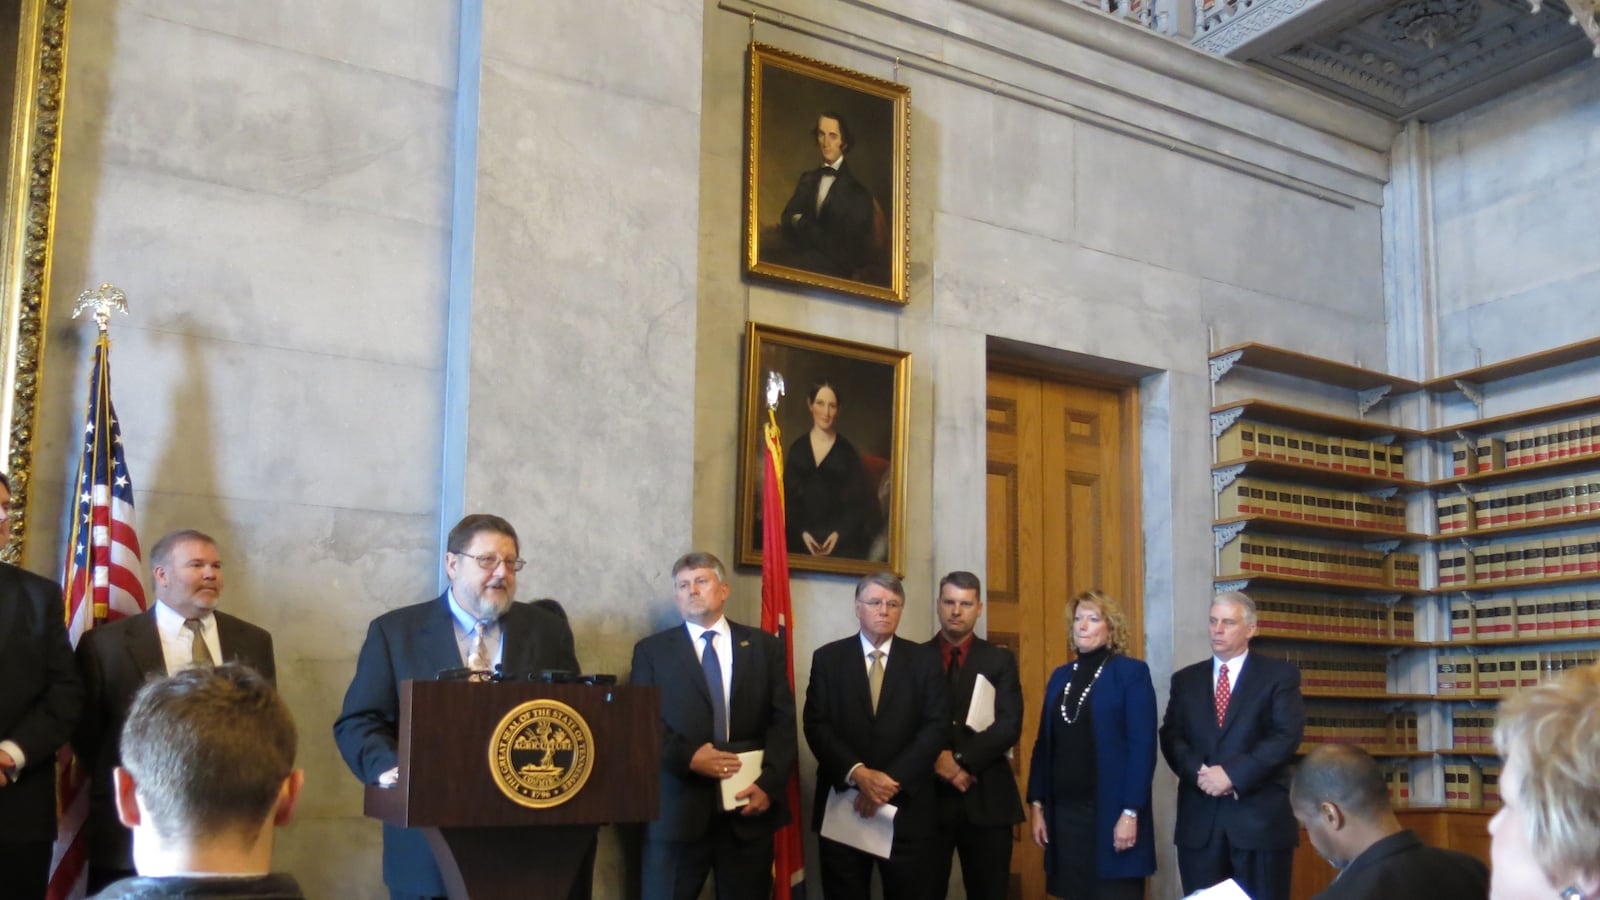 Flanked by several school district superintendents and directors, spokesman Wayne Miller addresses media at the State Capitol in January. Miller is executive director of the Tennessee Organization of School Superintendents.